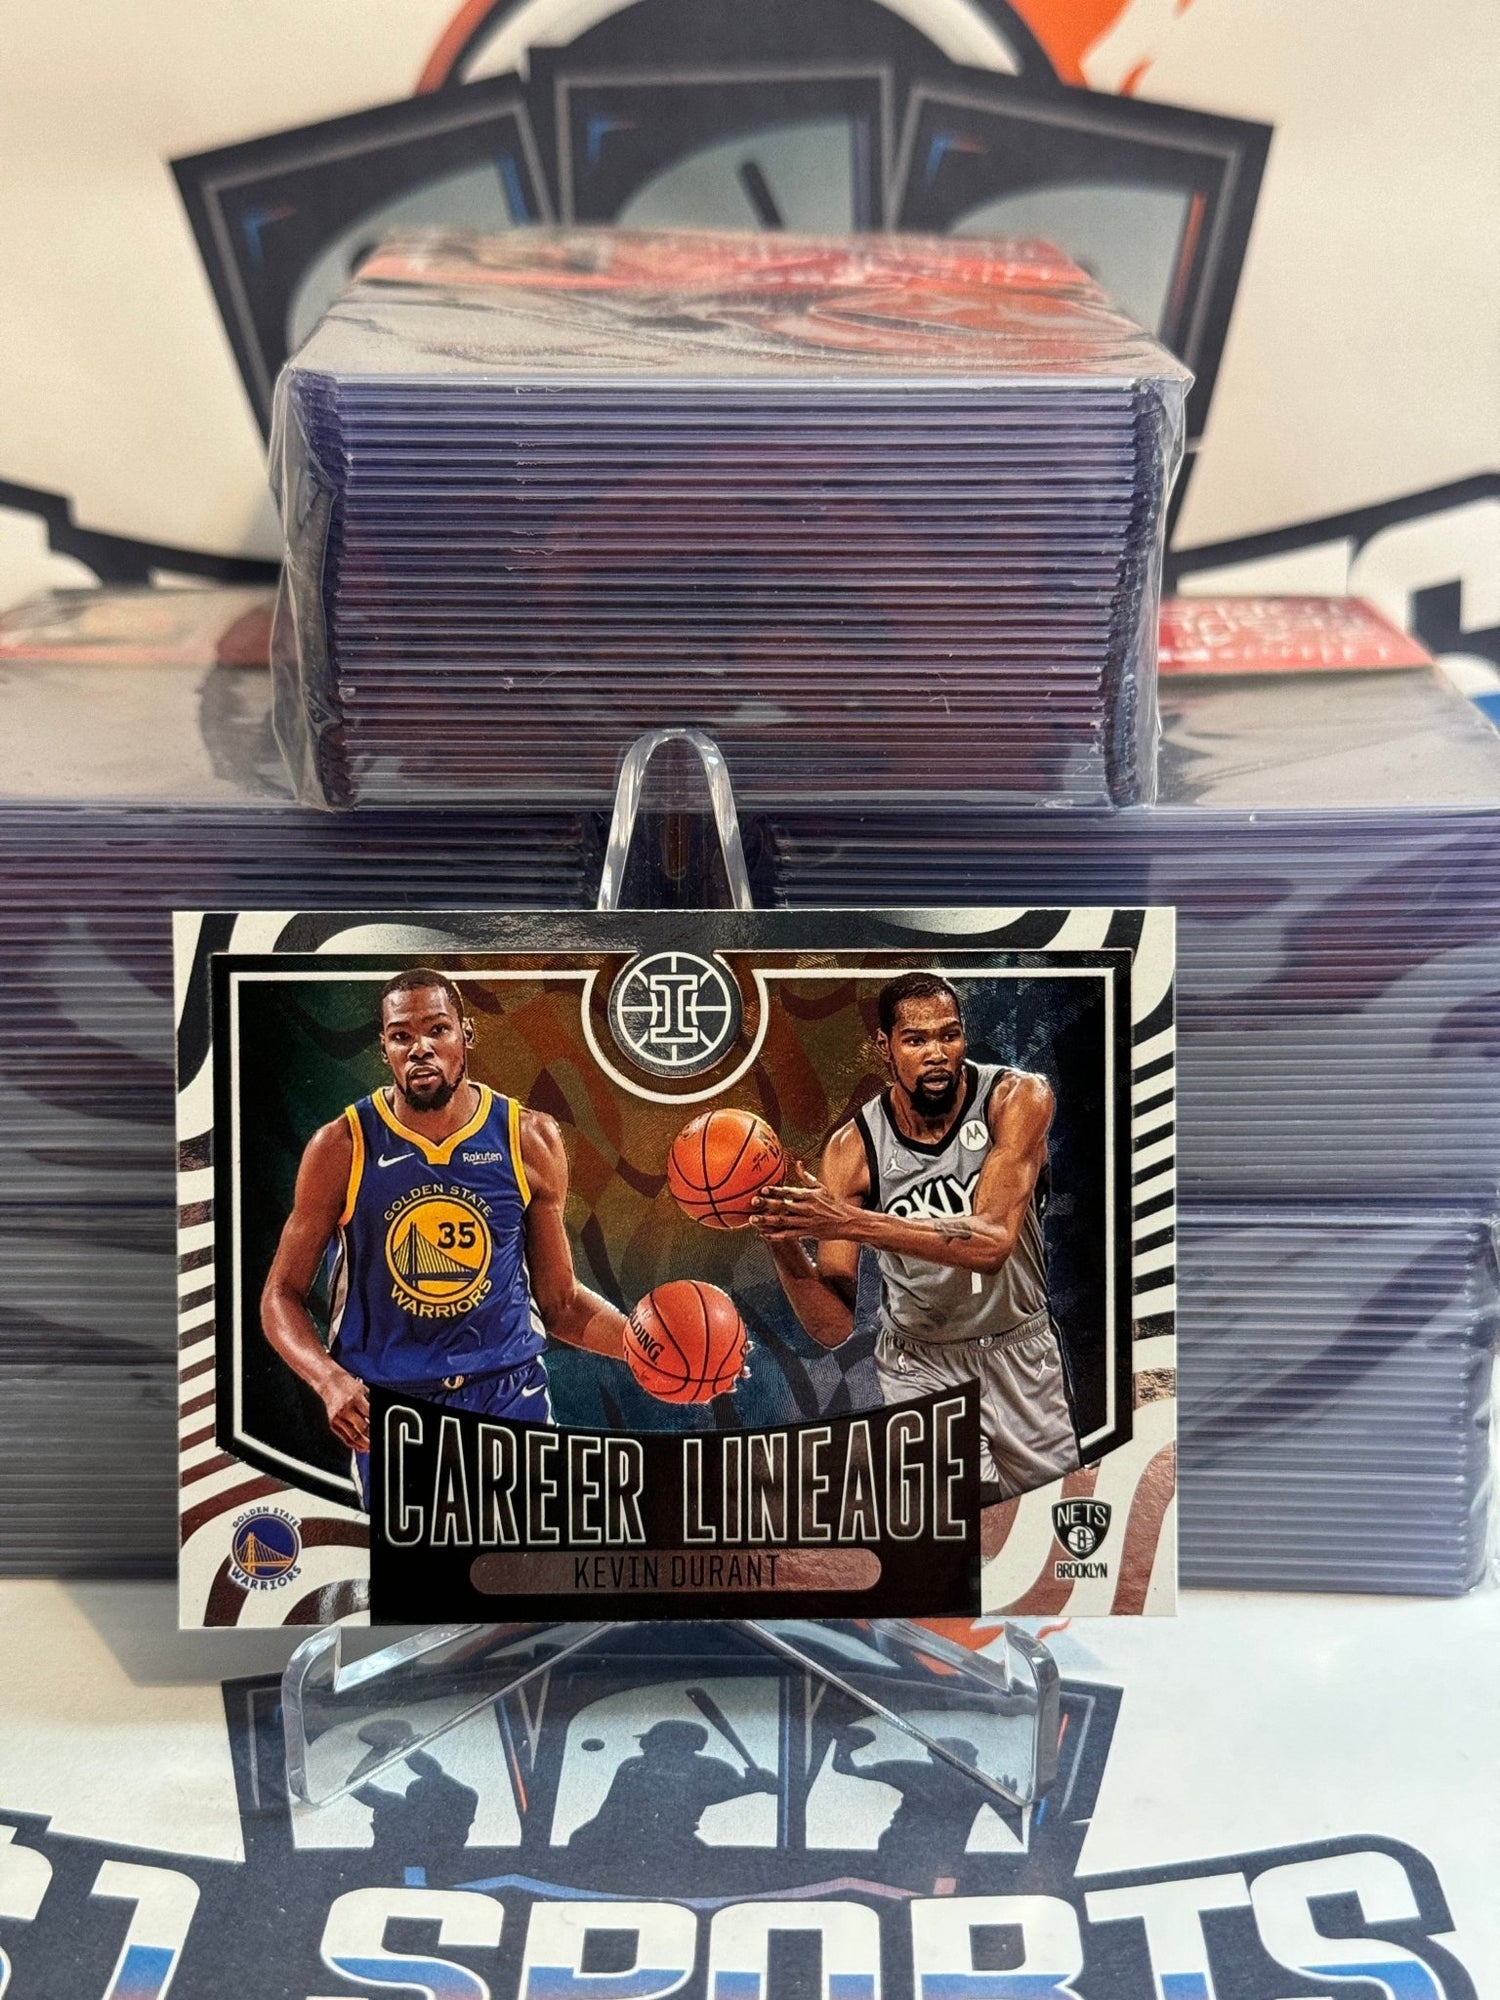 2020 Panini Illusions (Career Lineage) Kevin Durant #3